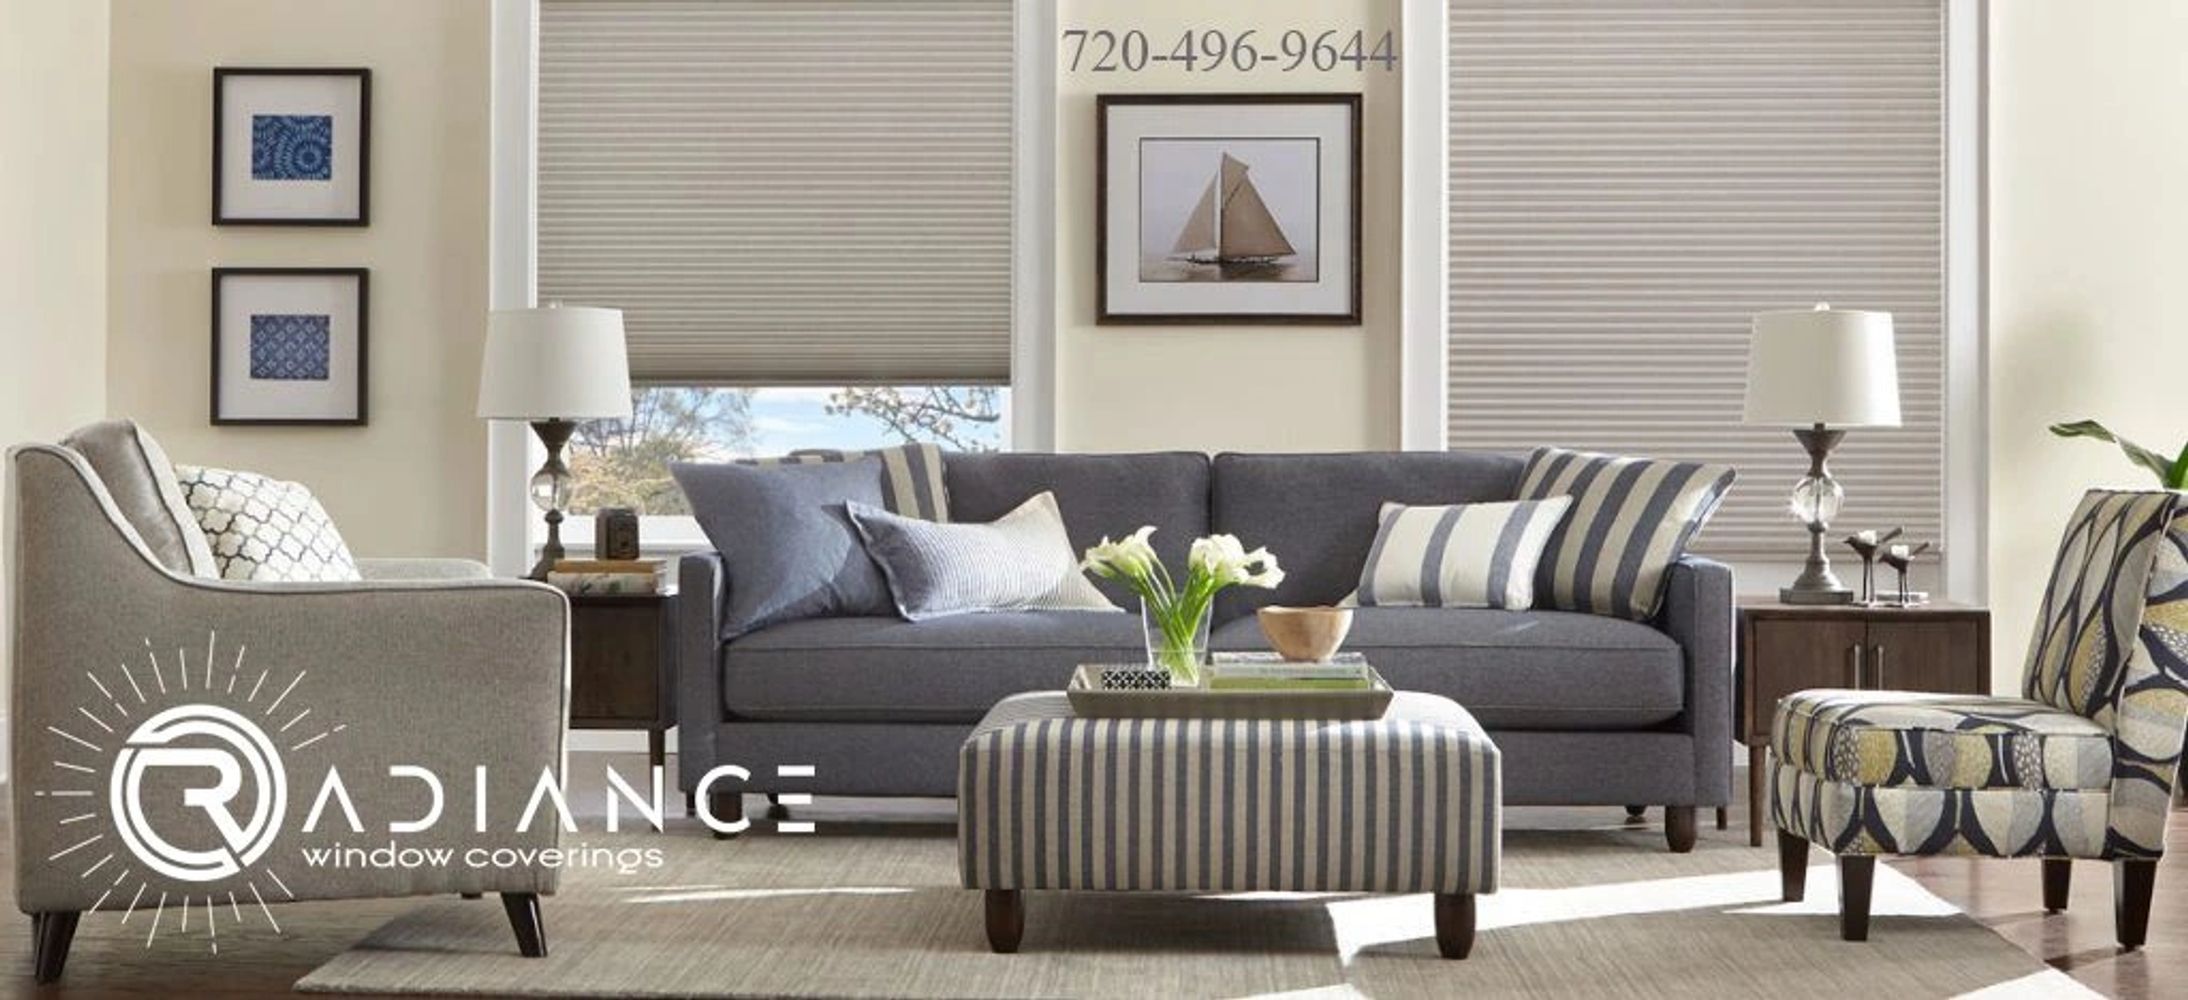 Radiance window coverings